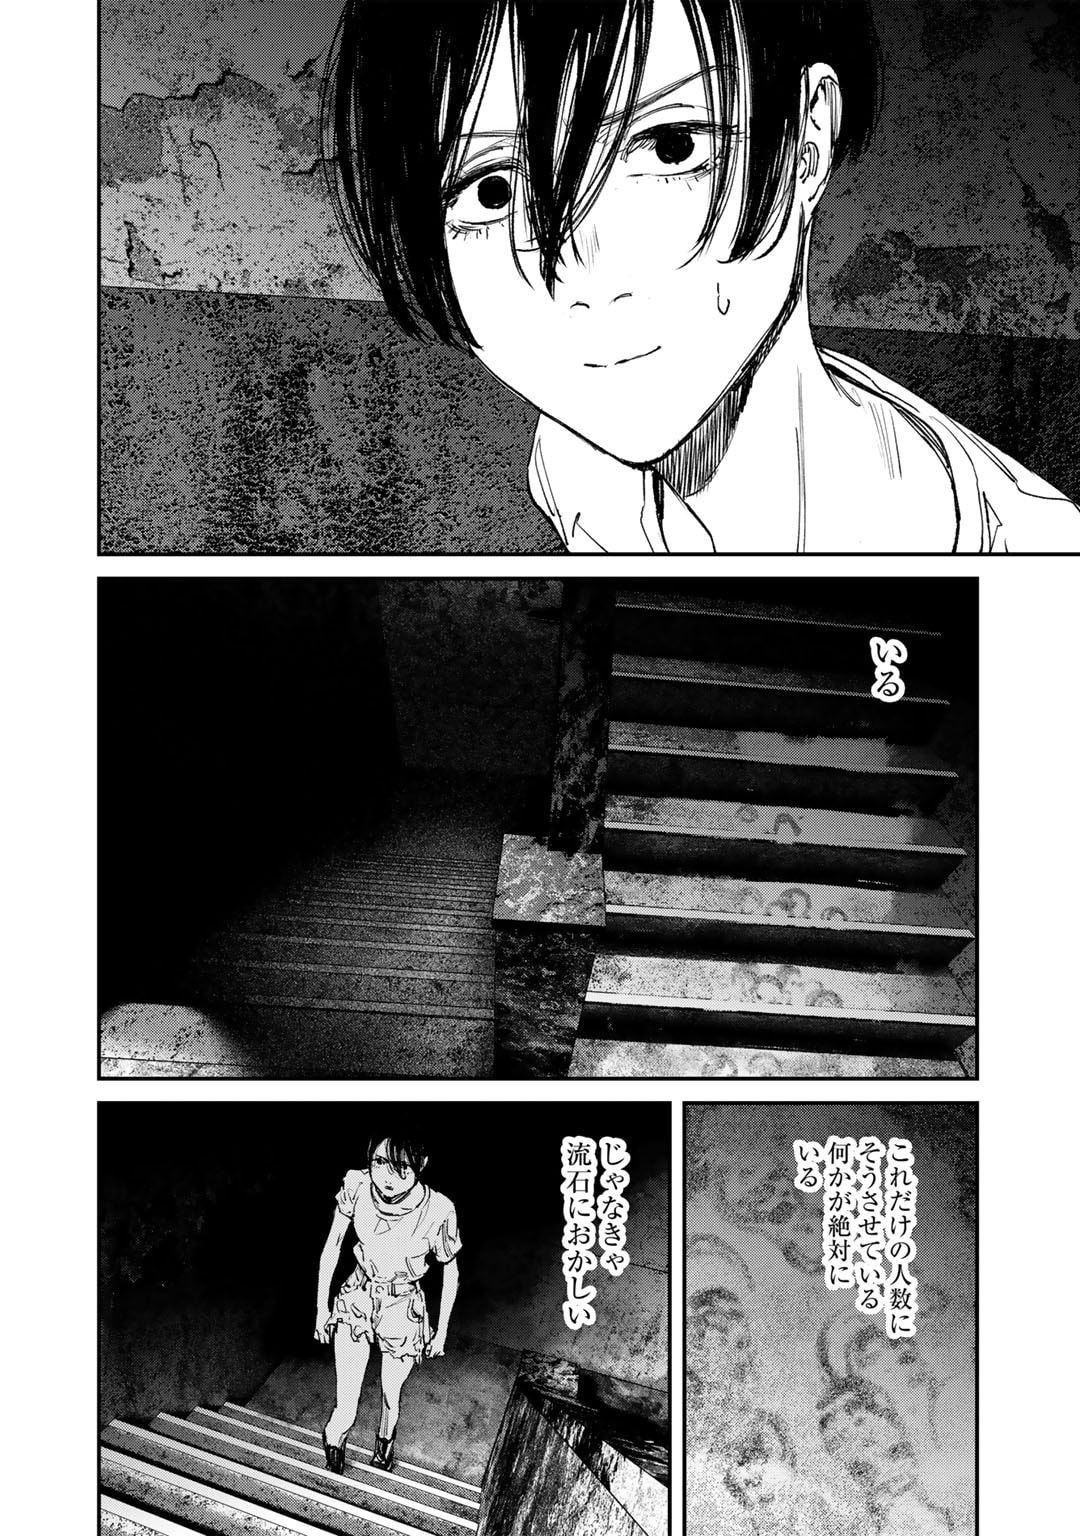 Kanata Is Into More Darker - Chapter 4 - Page 22